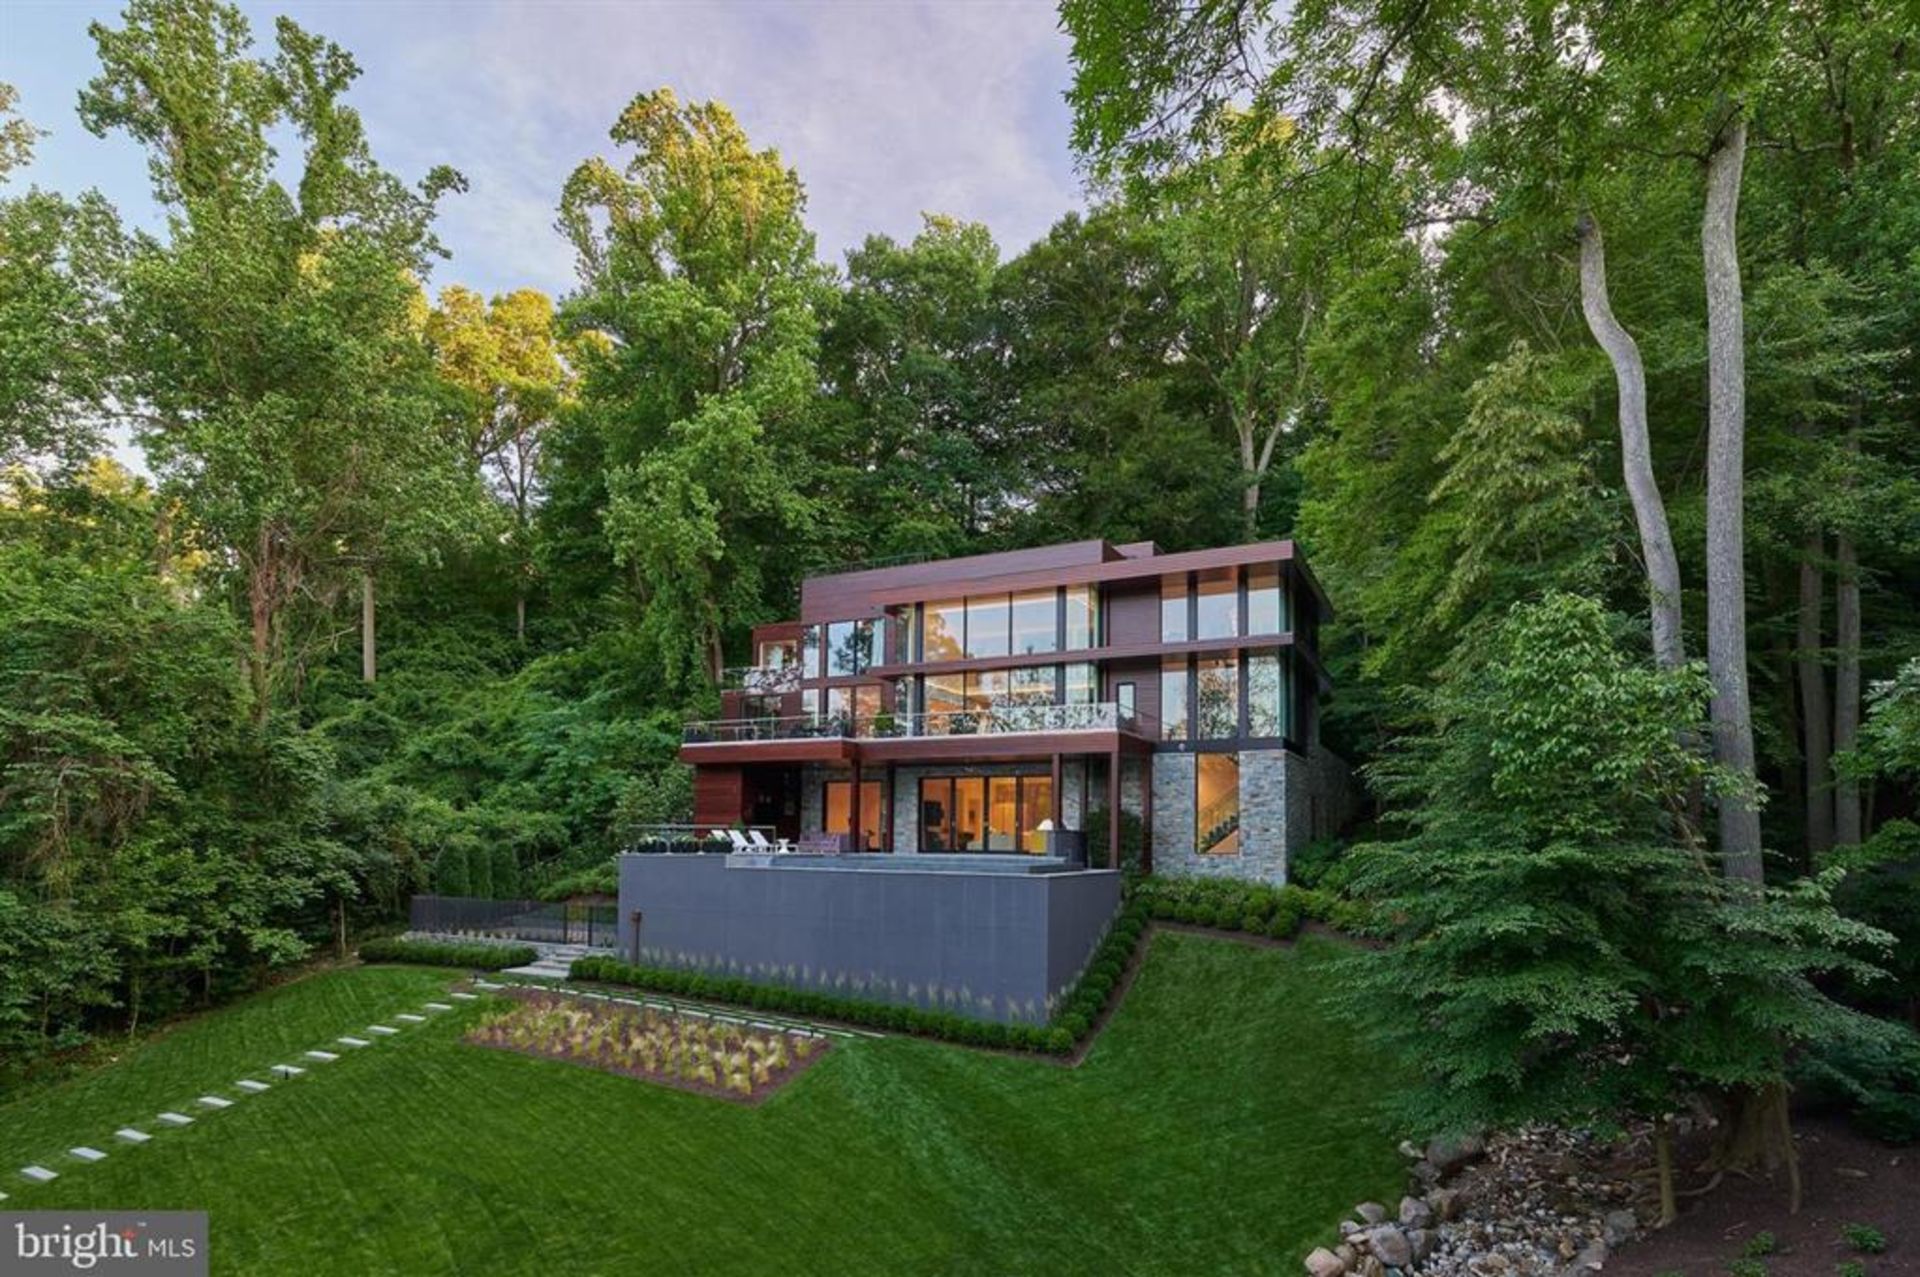 Top 5 Most Expensive Homes Sold In The DC Metro Area In 2021!